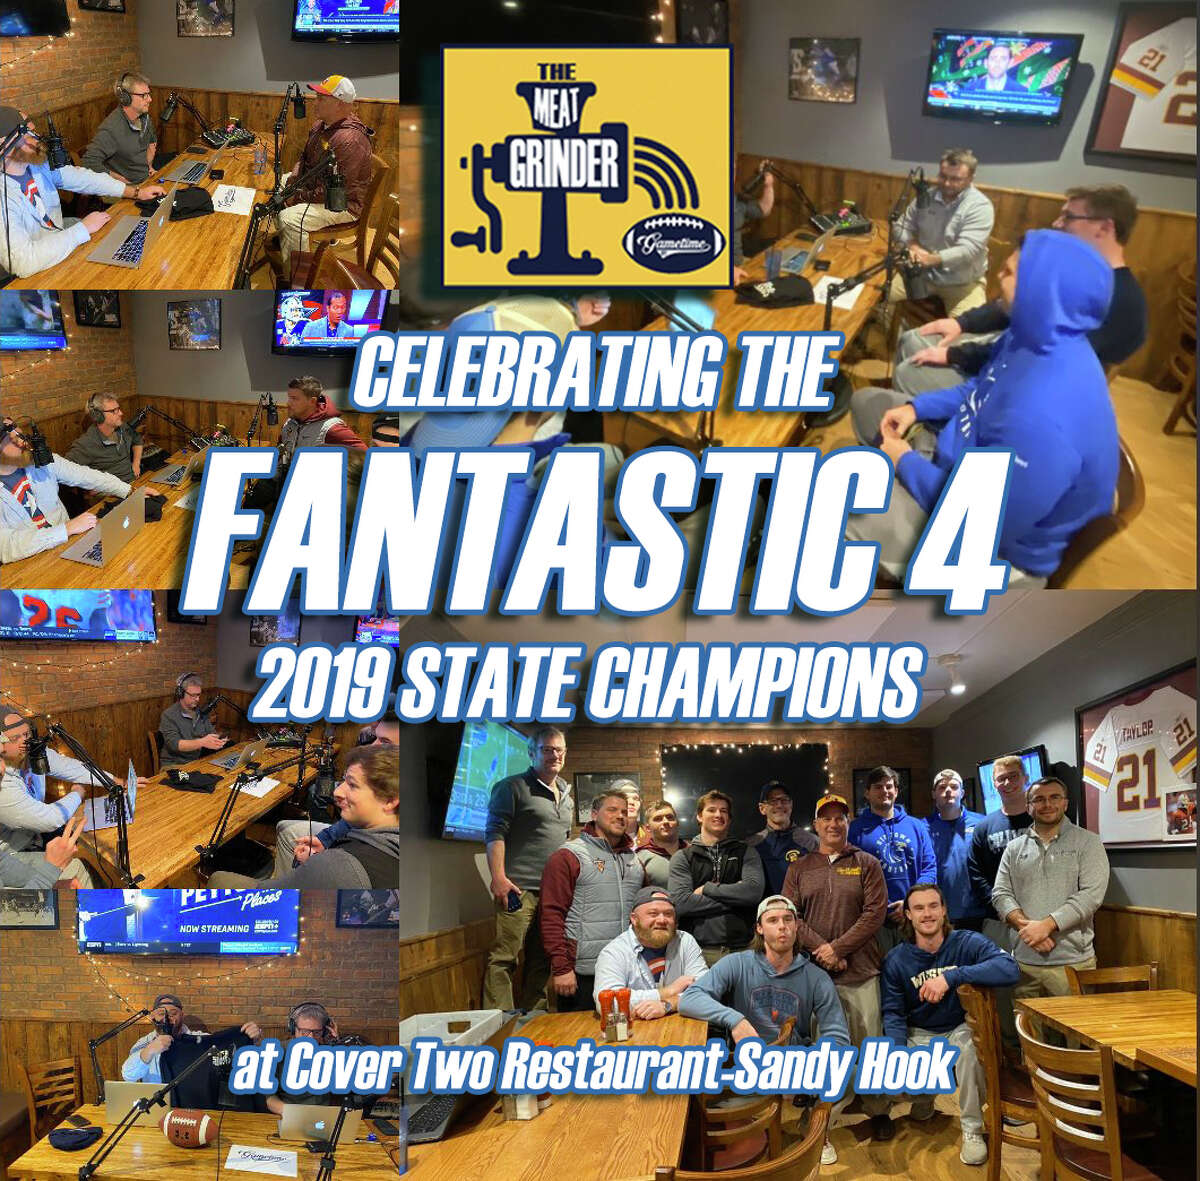 Collage of GameTimeCT hosts Pete Paguaga and Sean Patrick Bowley interviewing the 4 state champions Thursday, Dec. 19, 2019 at Cover Two Restaurant-Sandy Hook. (Photo via Cover Two)